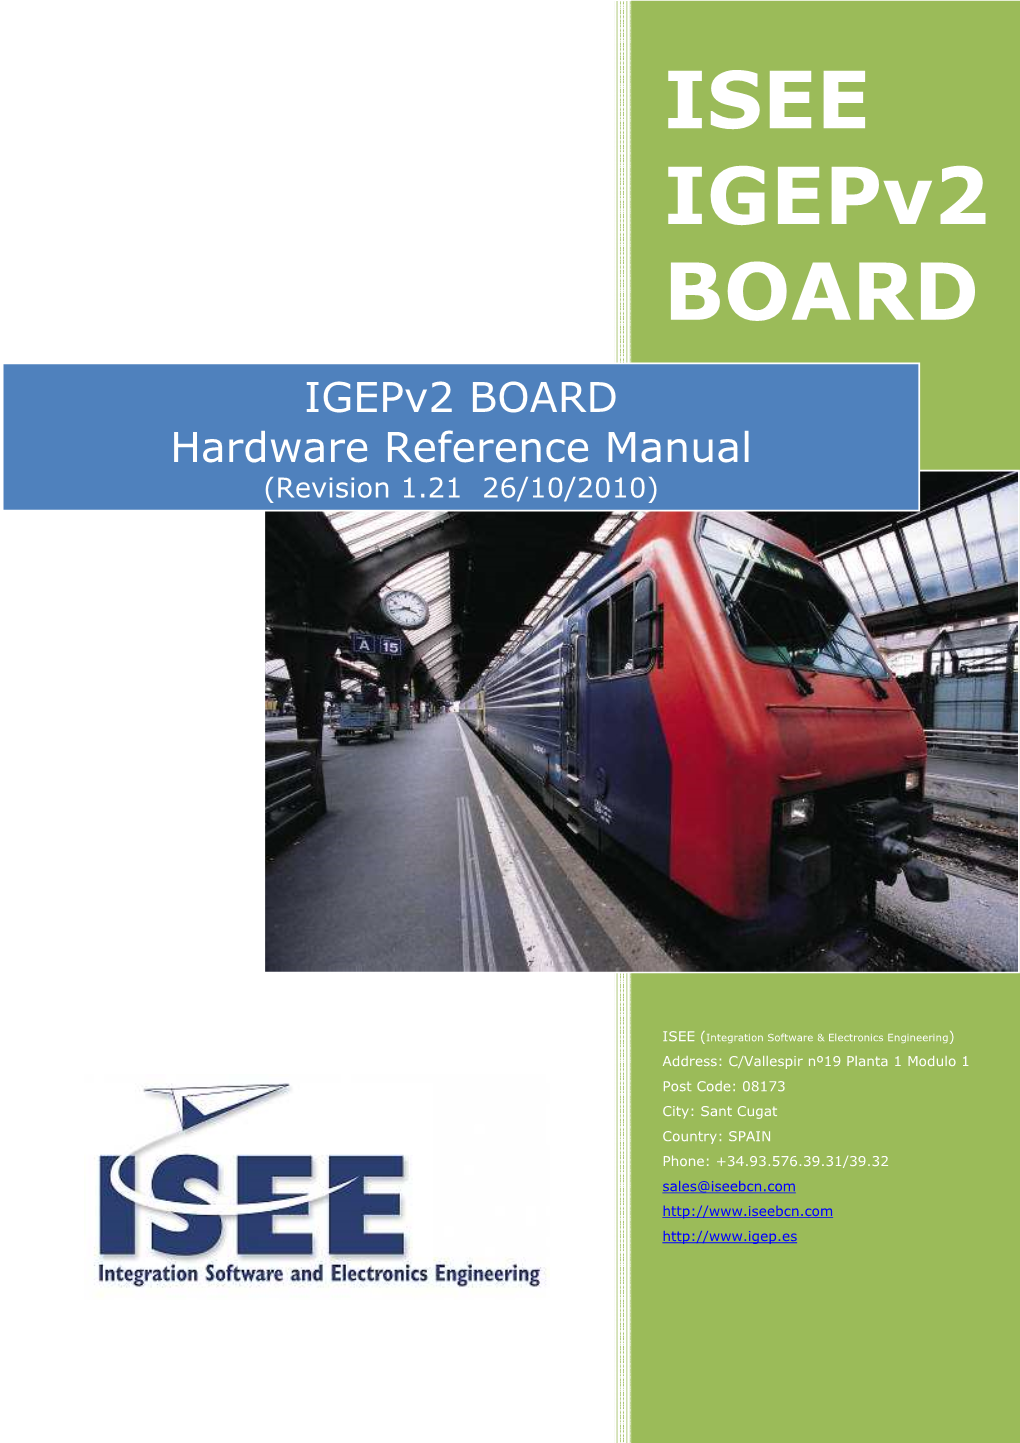 ISEE Igepv2 BOARD FEATURES